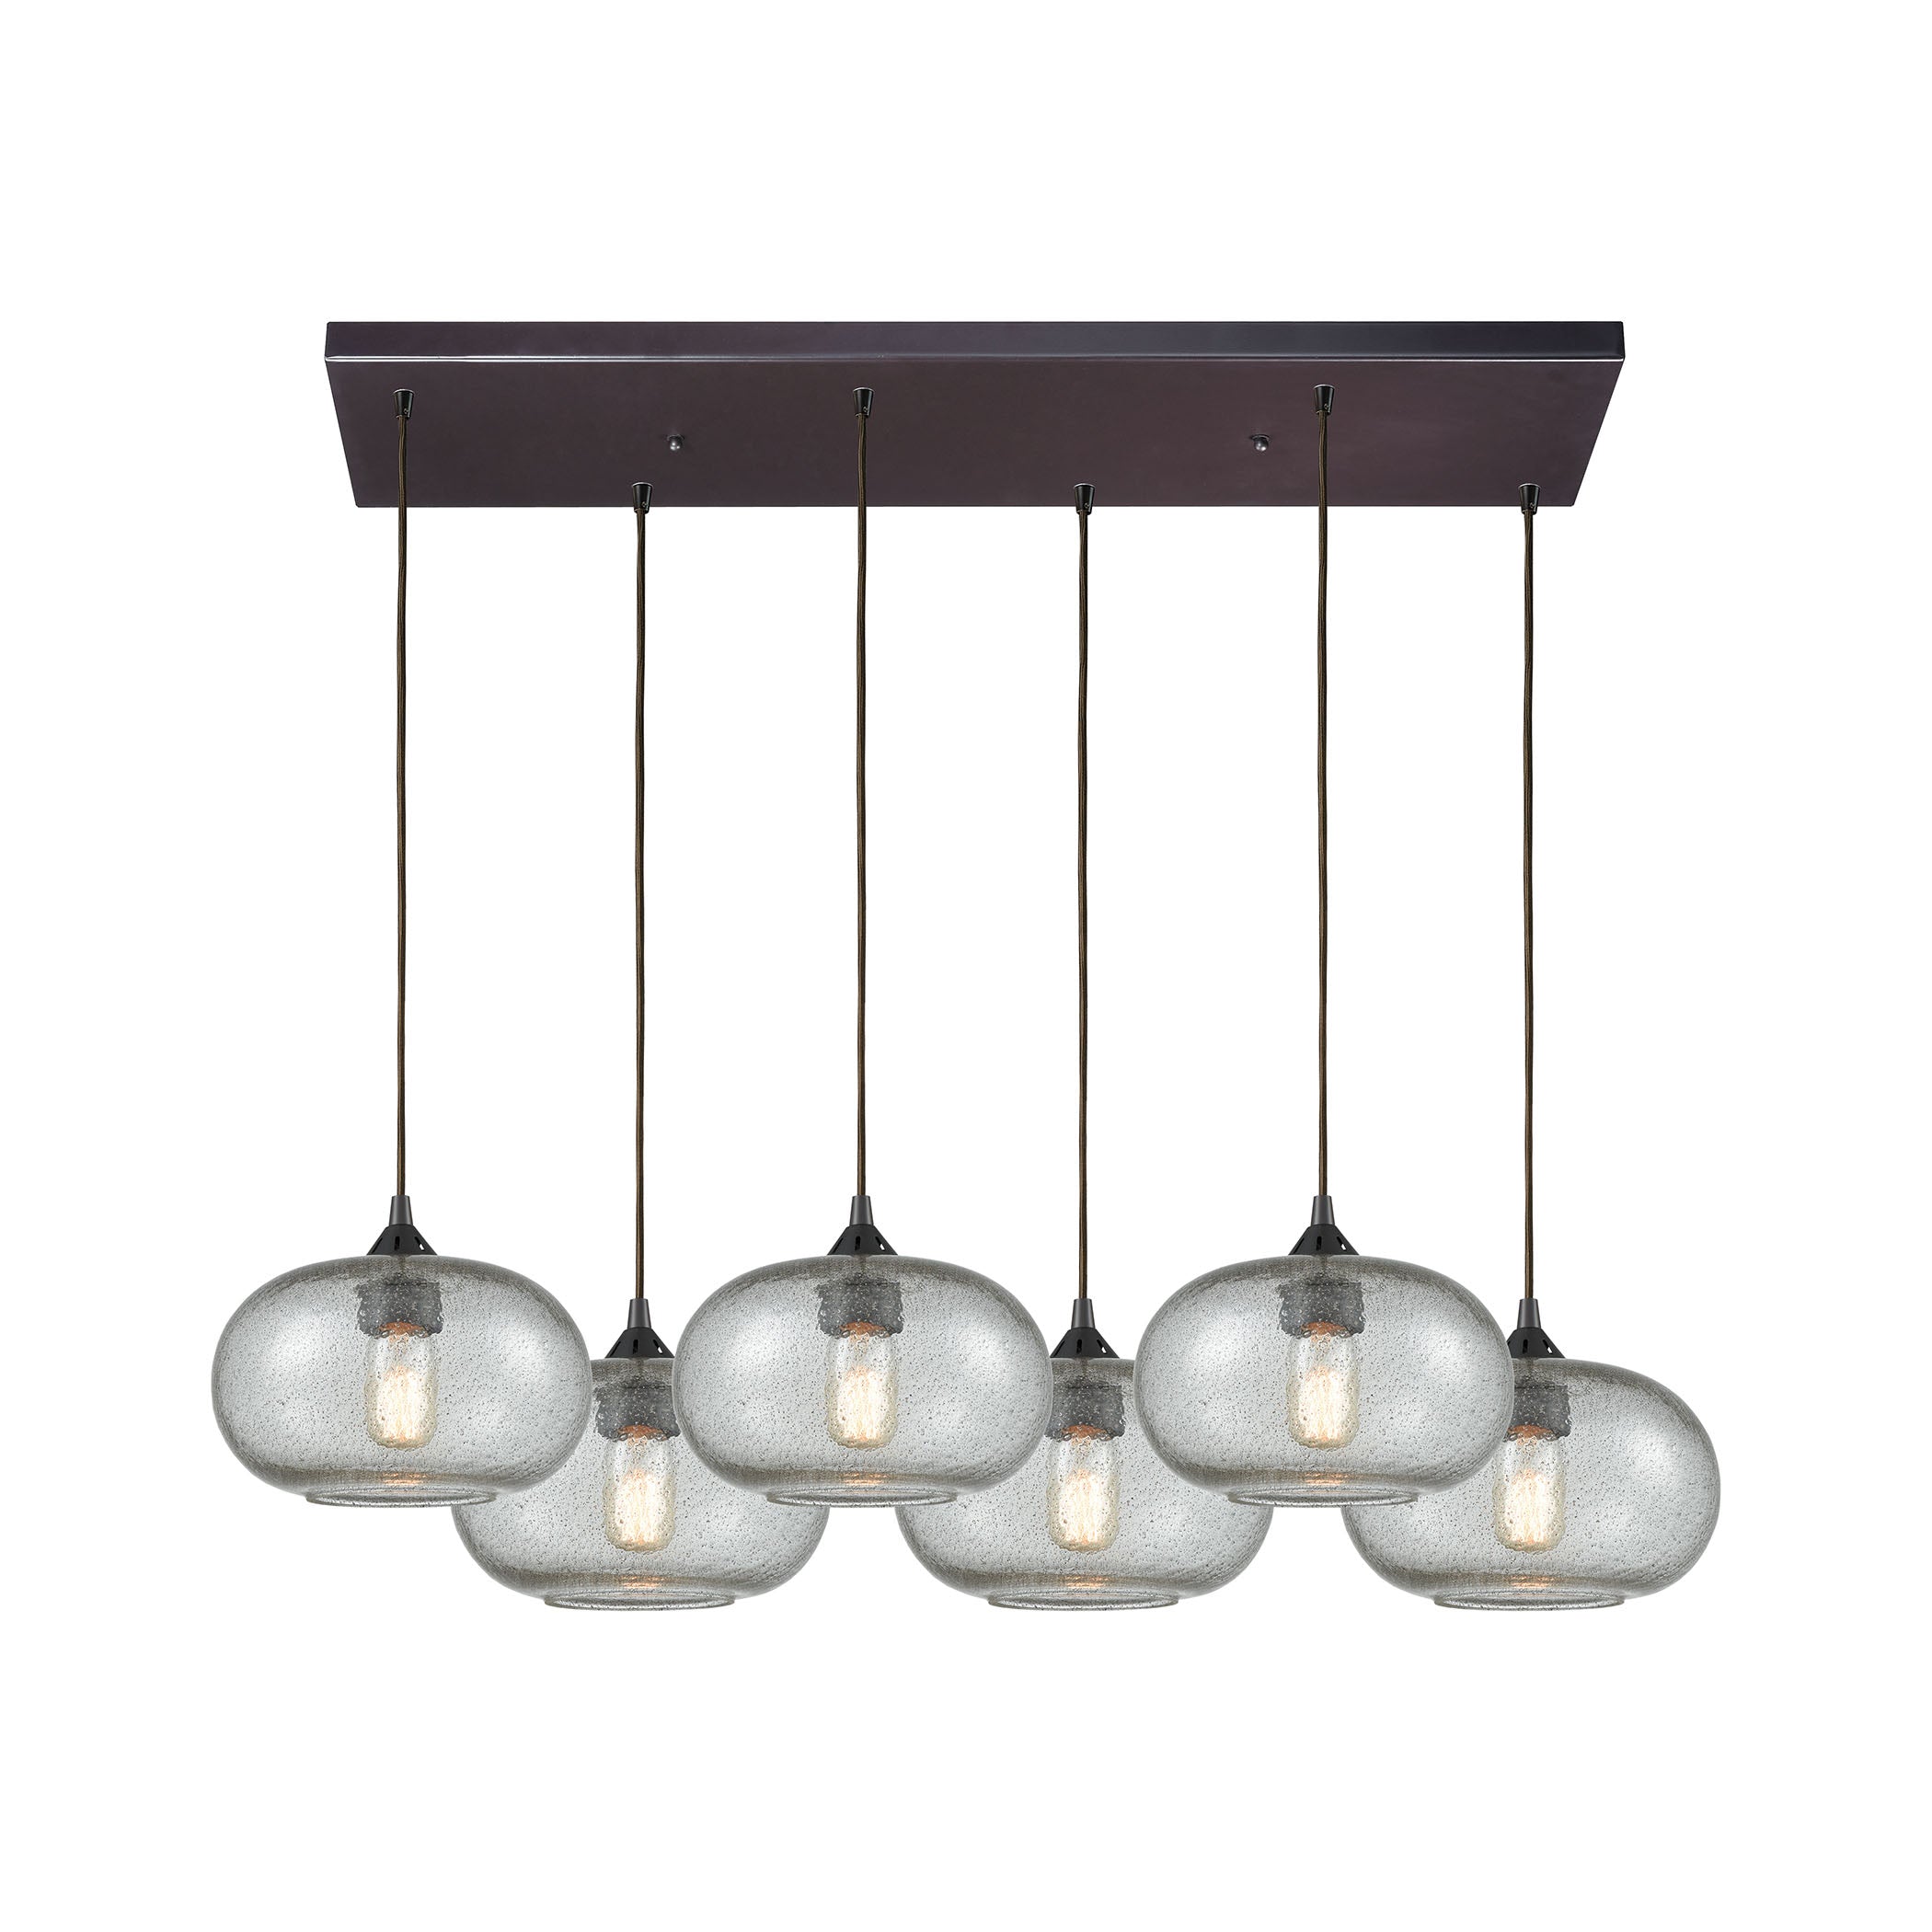 ELK Lighting 25124/6RC Volace 6-Light Rectangular Pendant Fixture in Oiled Bronze with Rotunde Gray Speckled Blown Glass